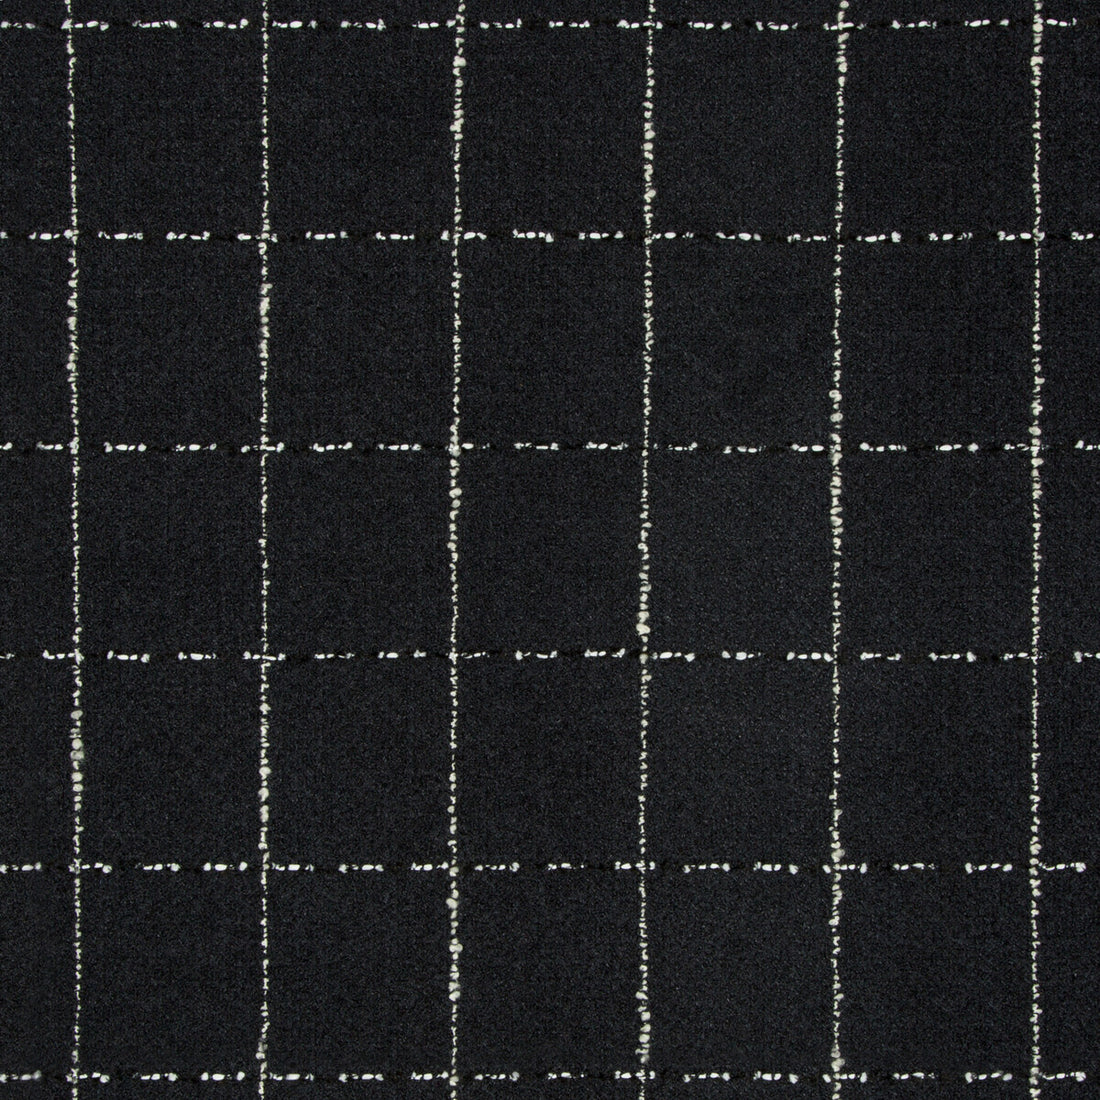 Pocket Square fabric in noir color - pattern 34906.8.0 - by Kravet Couture in the Modern Tailor collection